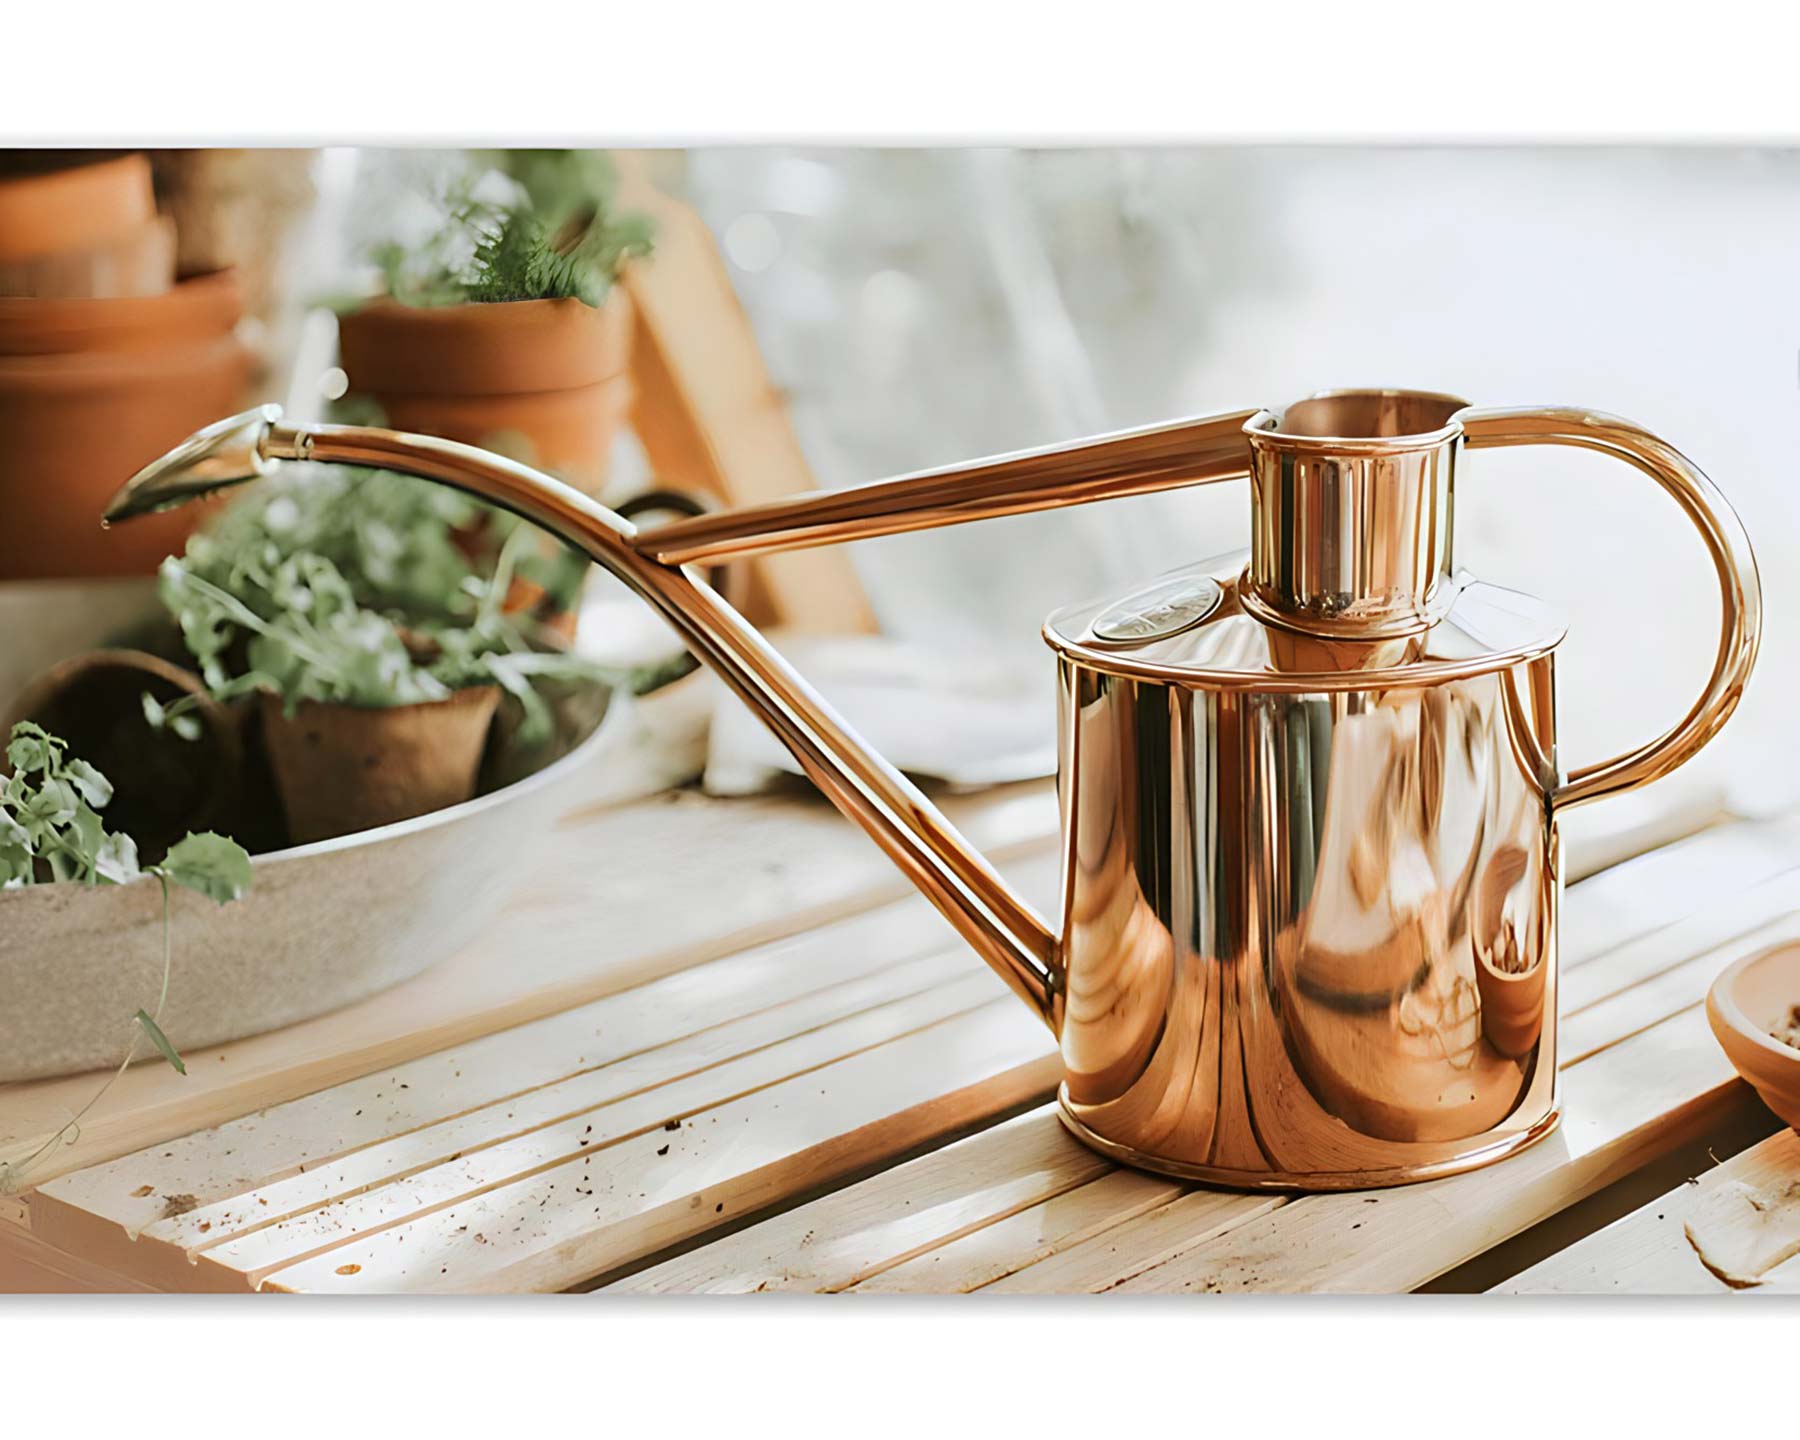 Rowley Ripple Watering Can, Copper - 2 Pint (1L) - Haws